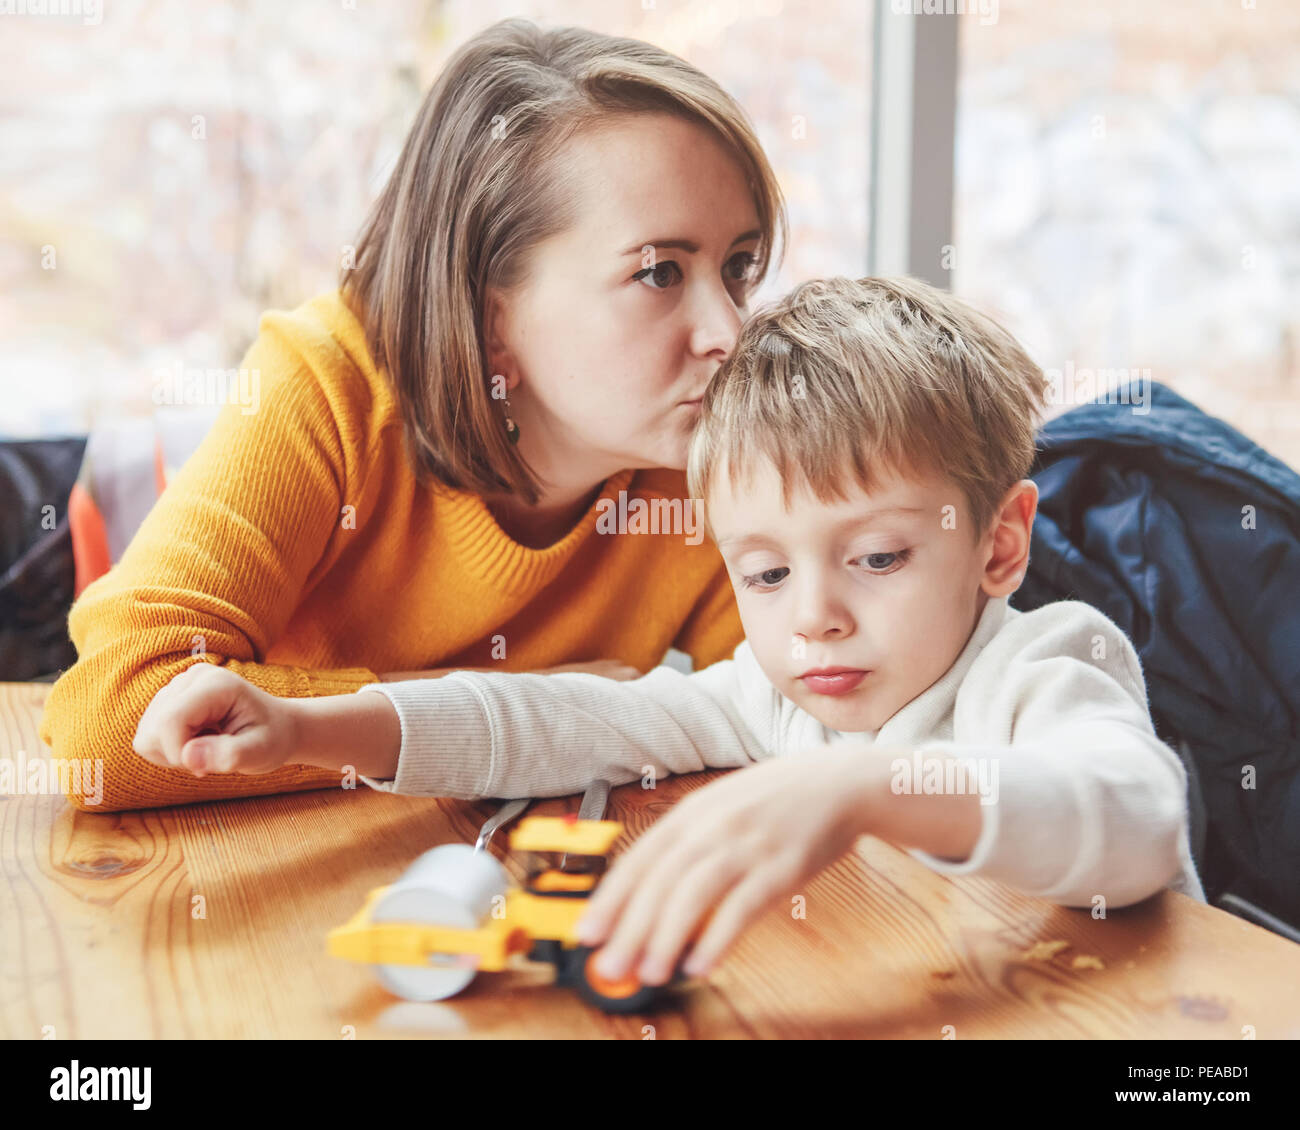 Portrait of white Caucasian happy family, mother and son, sitting in restaurant cafe at table, kissing playing with toy car, authentic lifestyle Stock Photo